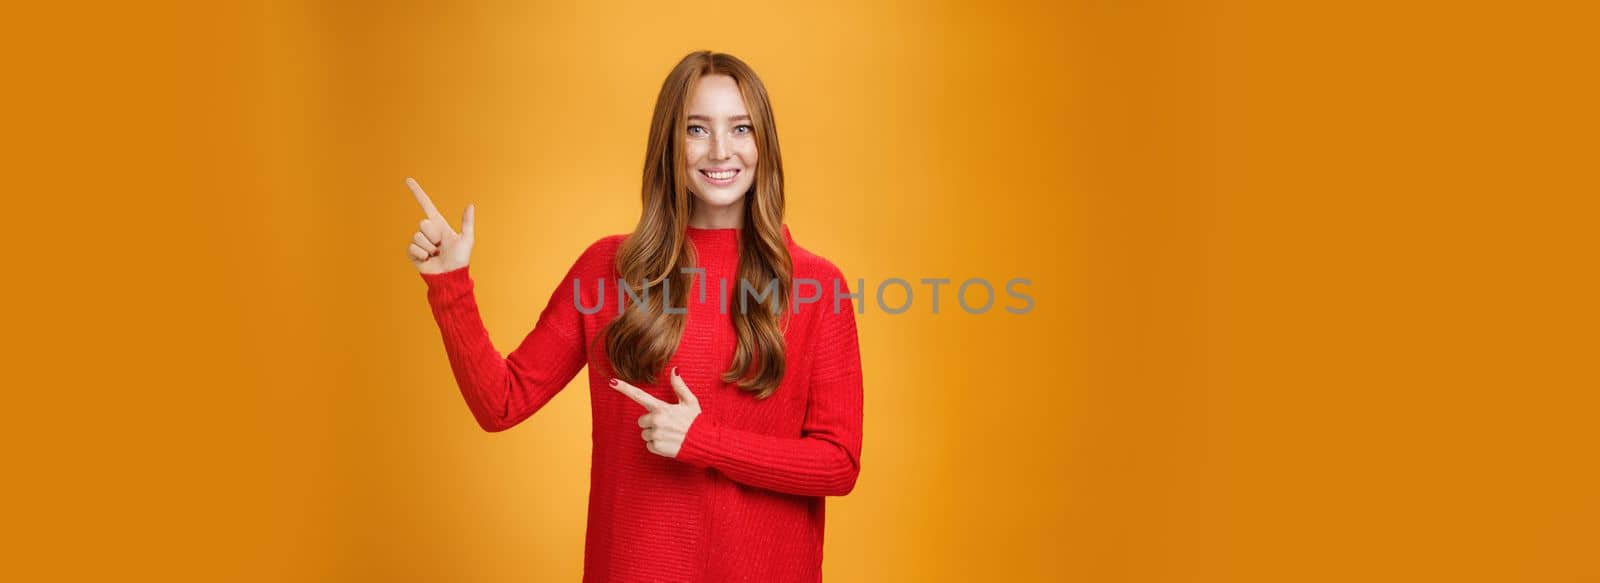 Lifestyle. Friendly-looking joyfuly and energized redhead female in red sweater pointing at upper right corner promoting advertisement with broad delighted and tender smile posing against orange background.